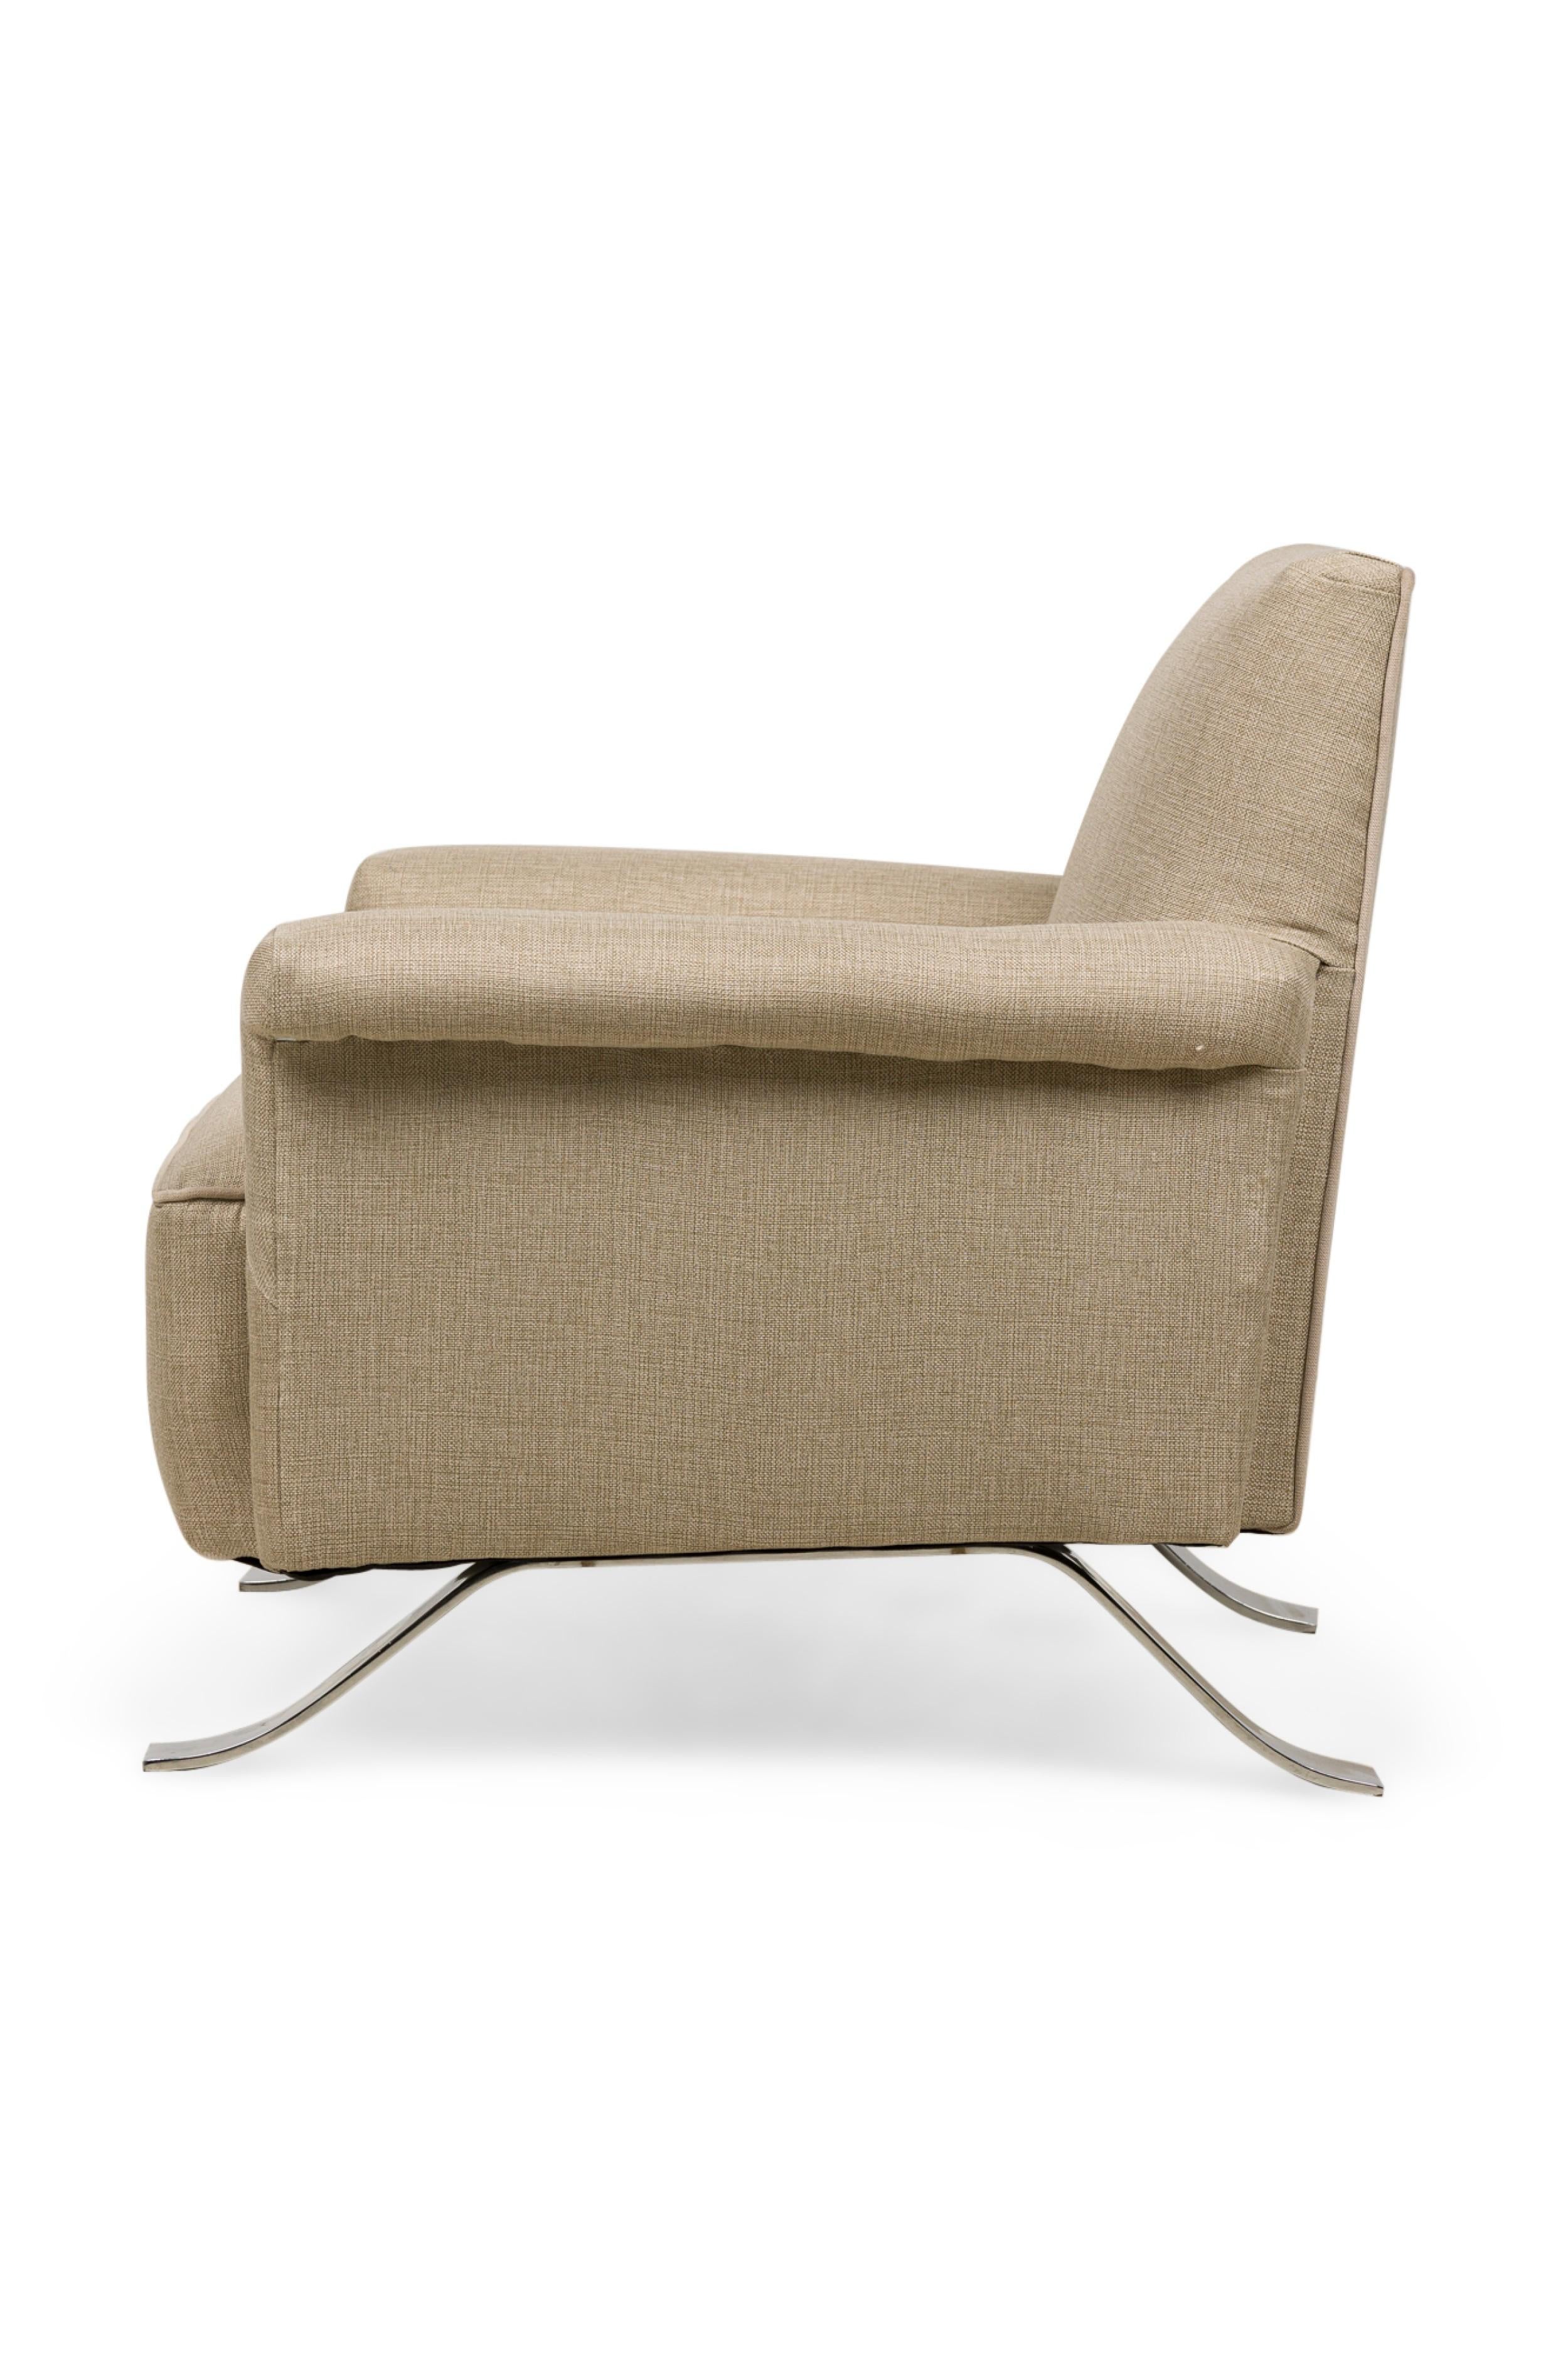 Woven Pair of Mid-Century American Chrome Beige Fabric Upholstered Lounge / Armchairs For Sale